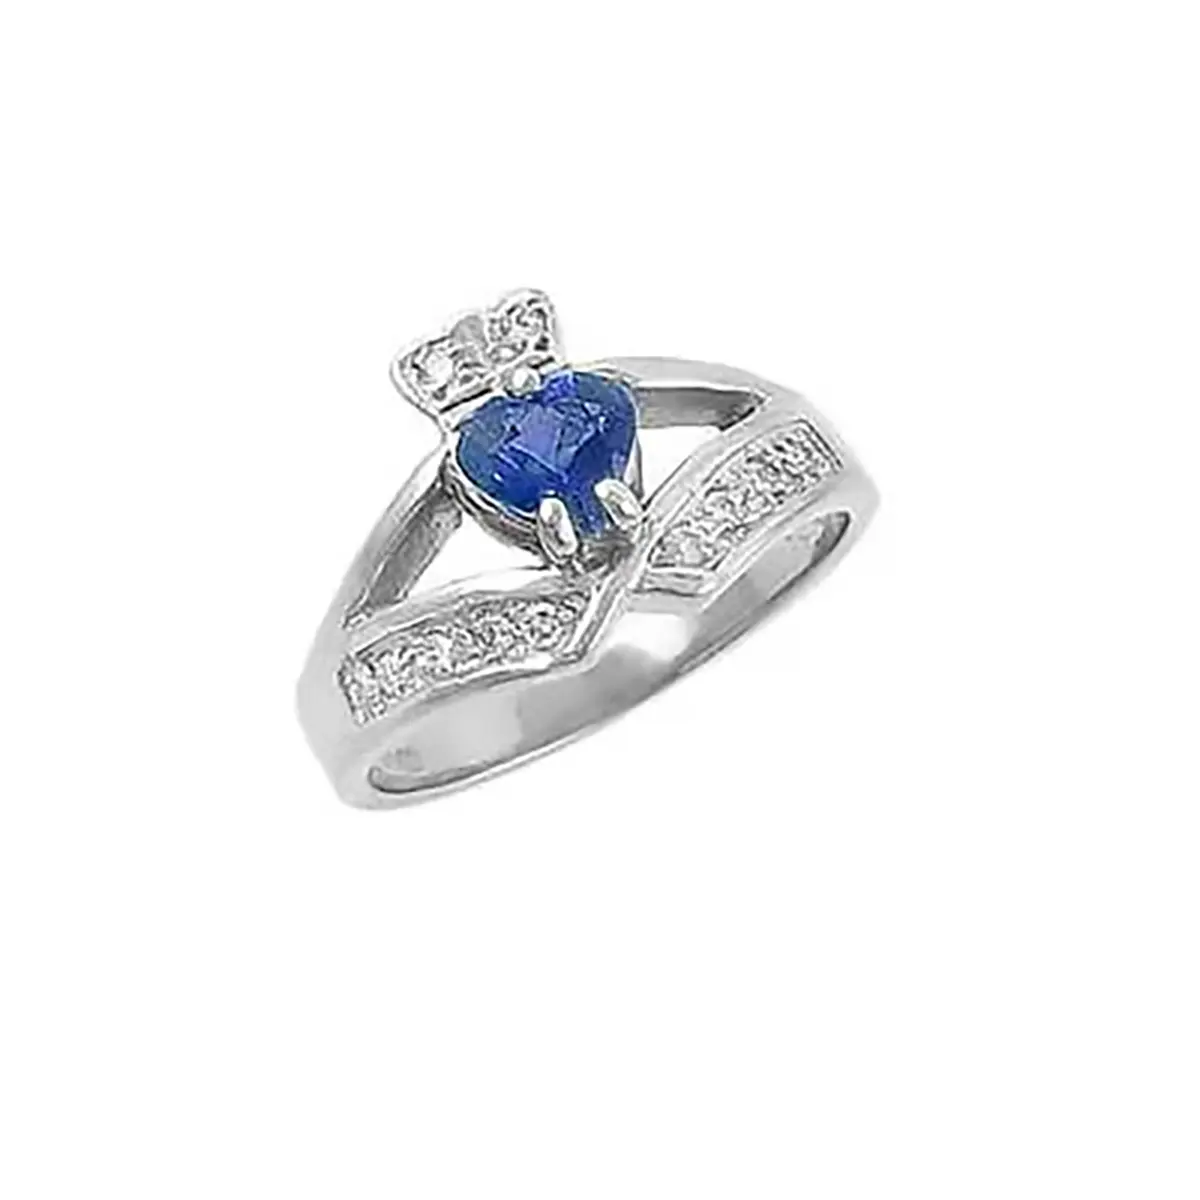 14K White Gold Claddagh Wishbone Ring Set With Heart Shaped Sapphire A...